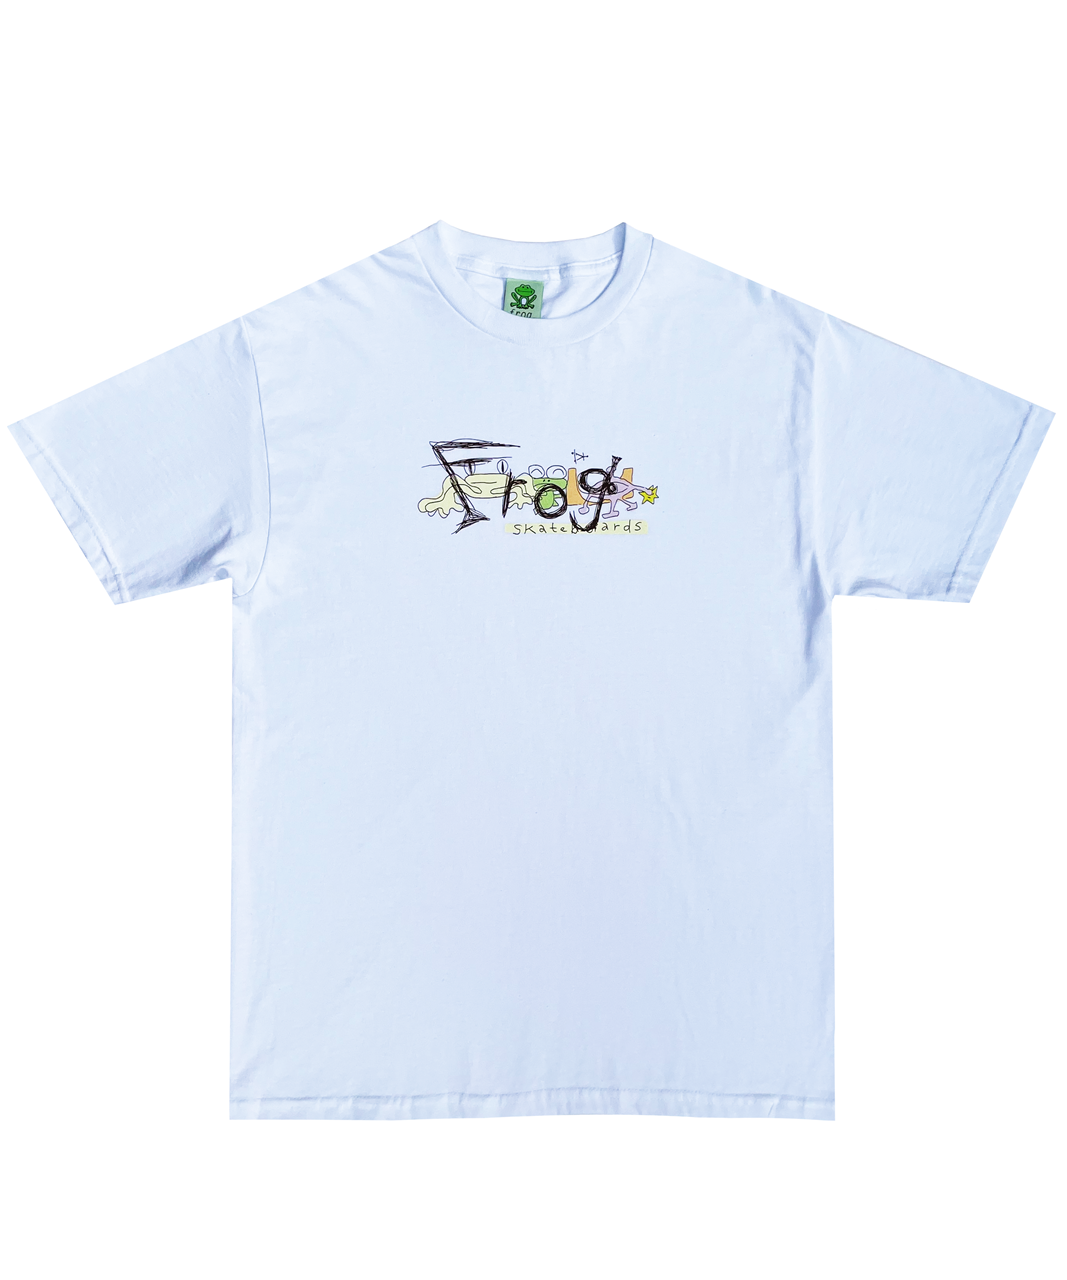 FROG Busy Frog Tee - White